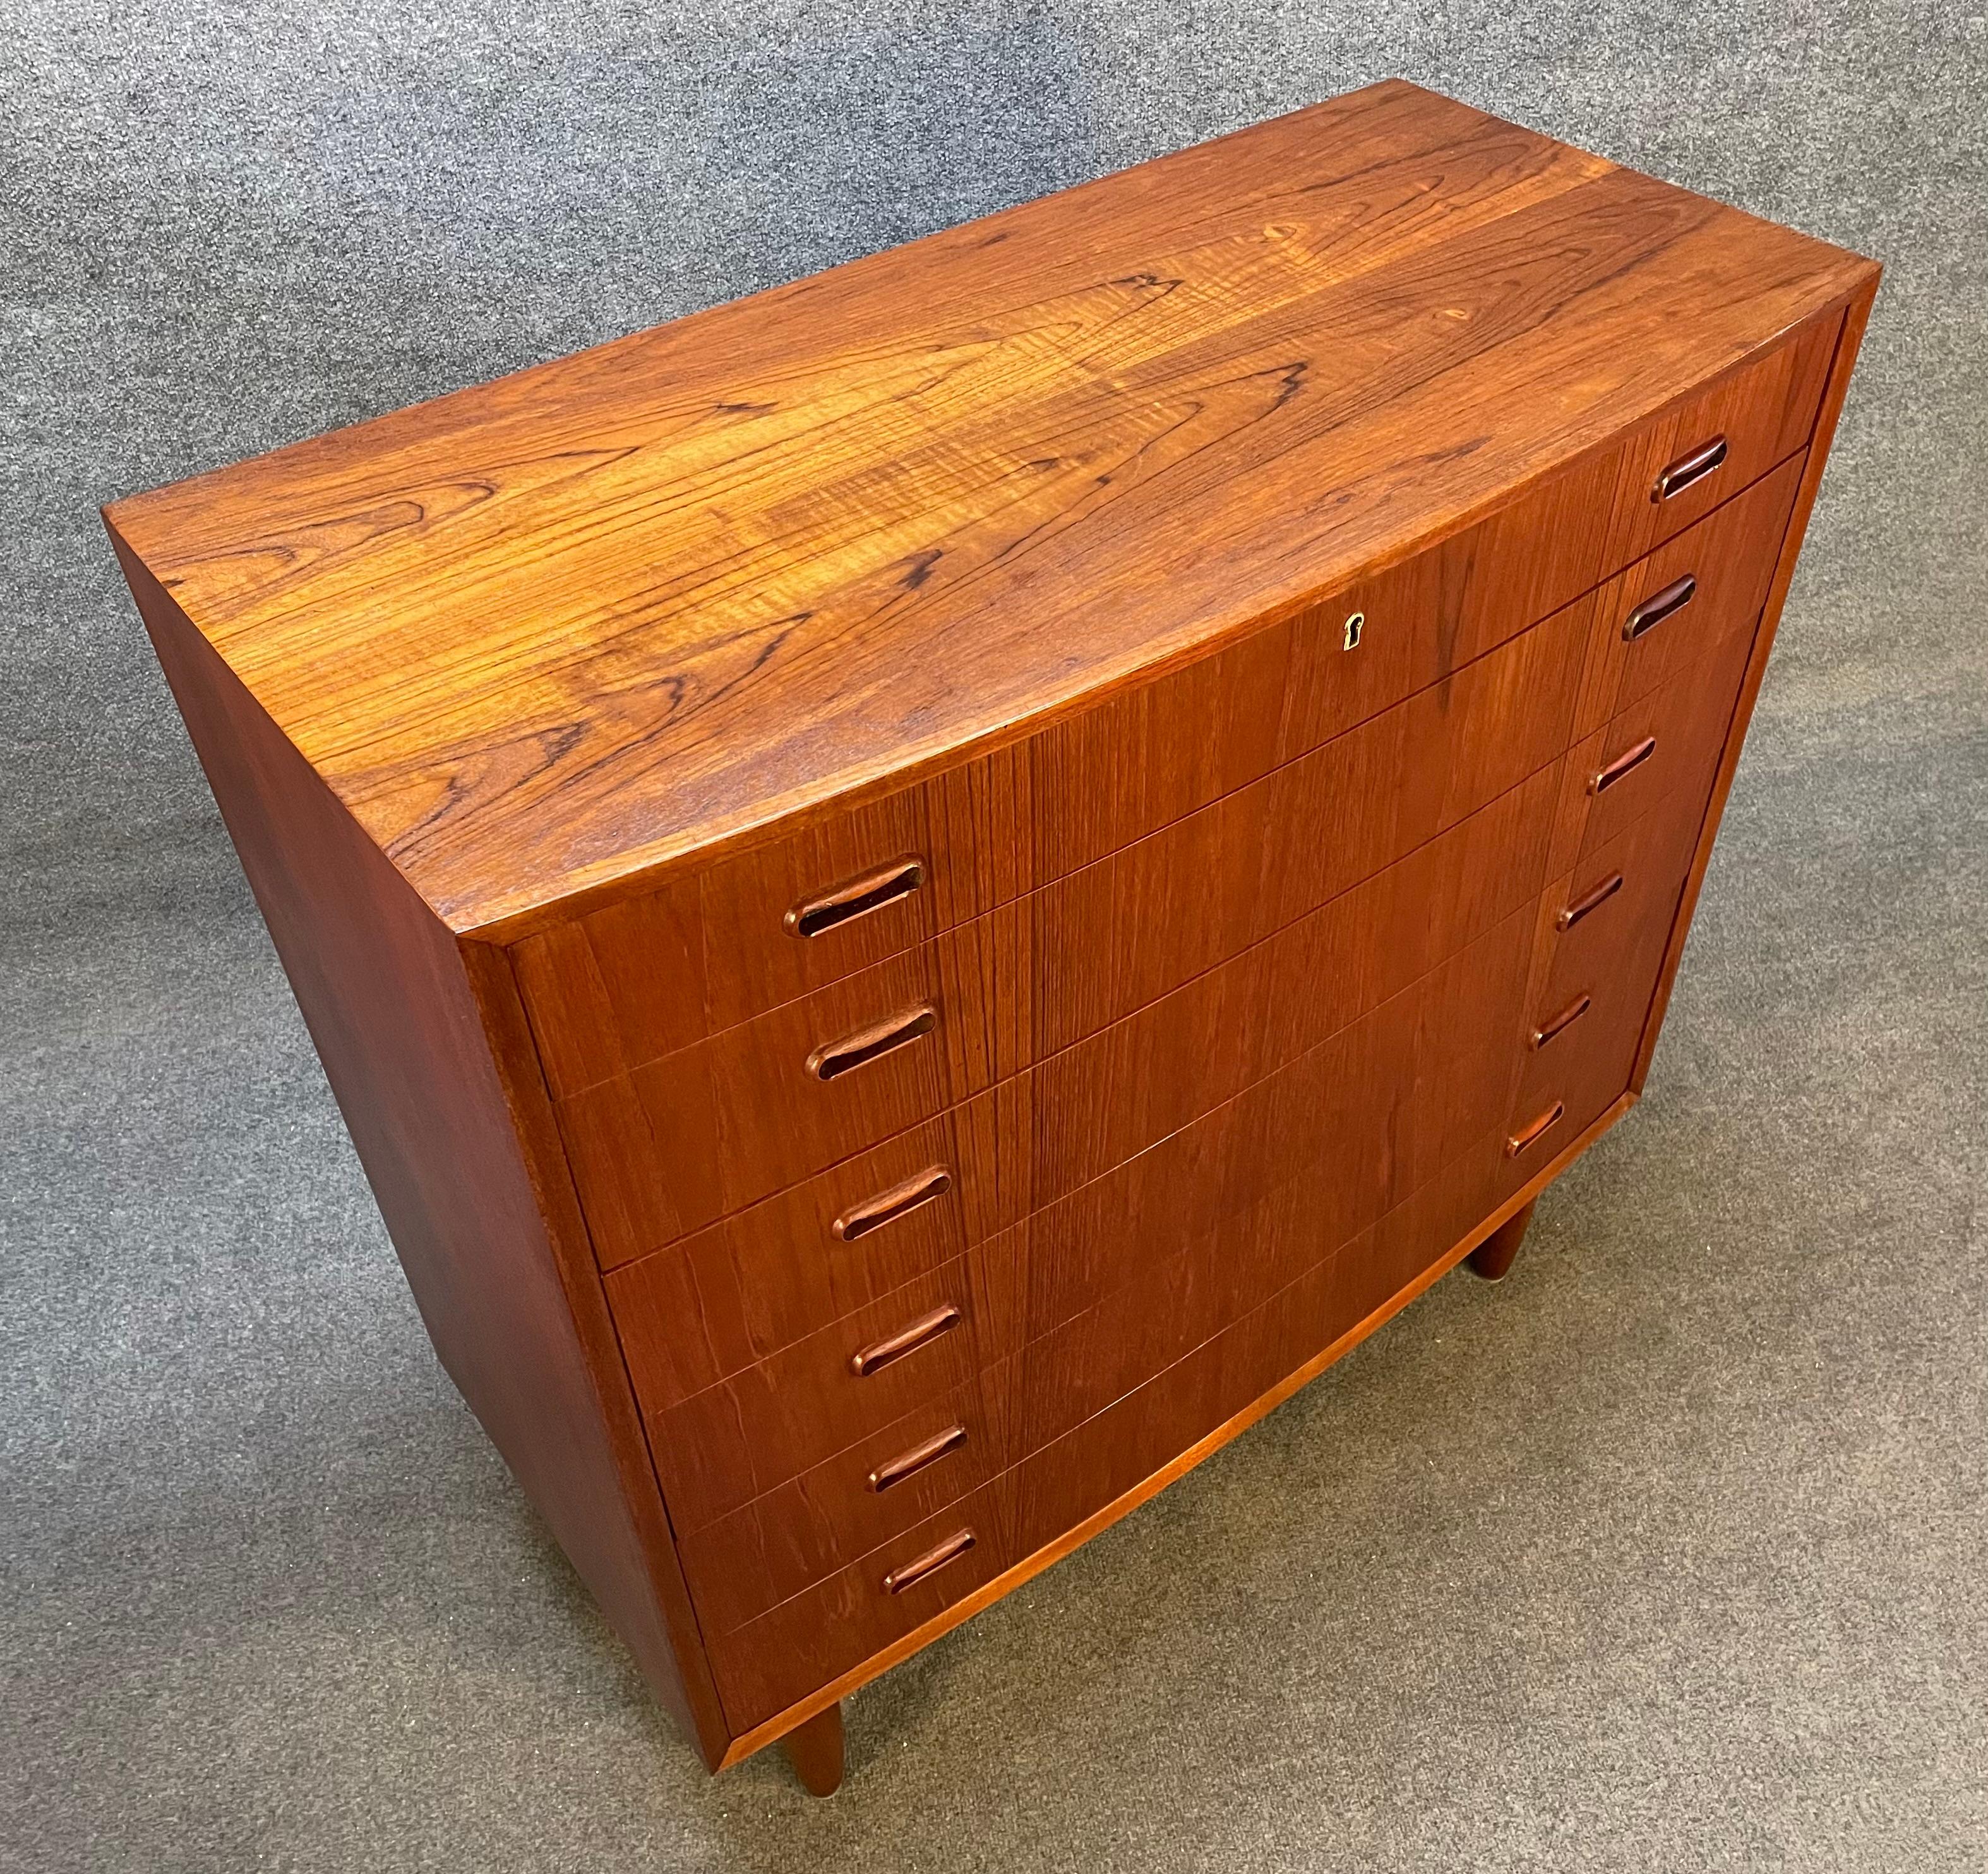 Here is a beautiful 1960's Scandinavian Modern teak chest of drawers dresser reminiscent of Arne Vodder's design.
This exquisite piece, recently imported from Europe to California before its refinishing, features a bowed front, vibrant wood grain,